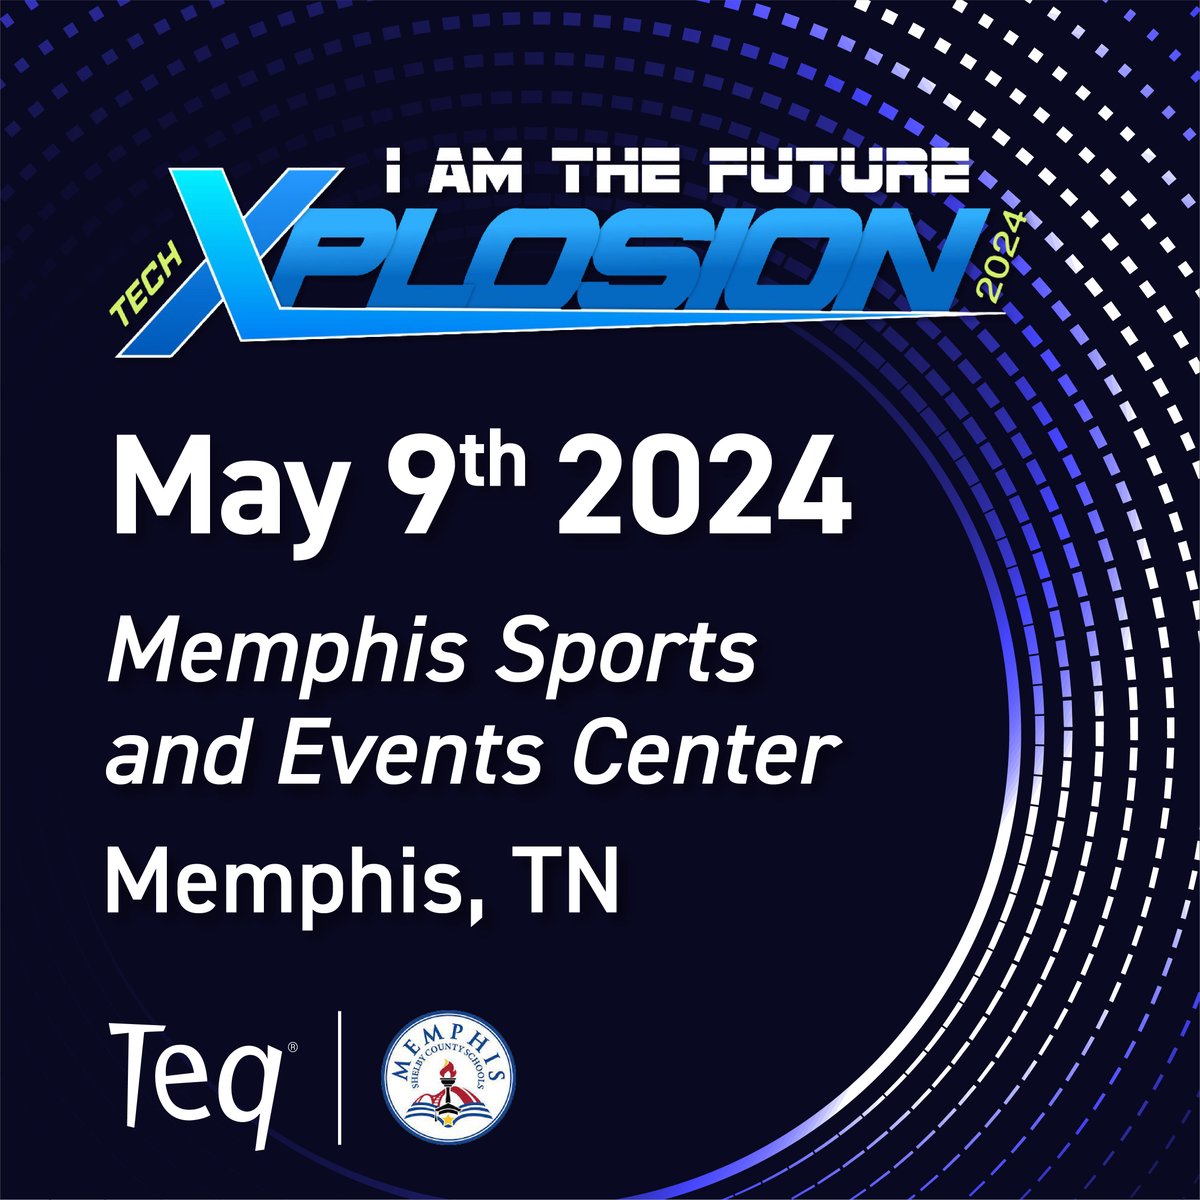 Calling all tech X-perts! We'll be at the 2024 I Am The Future Tech XPlosion conference on May 9, 2024! Come see all that we have to offer at booth #2 in the XPloration Zone! #edtech #edchat #TechXPlosion #STEM @MSCSK12